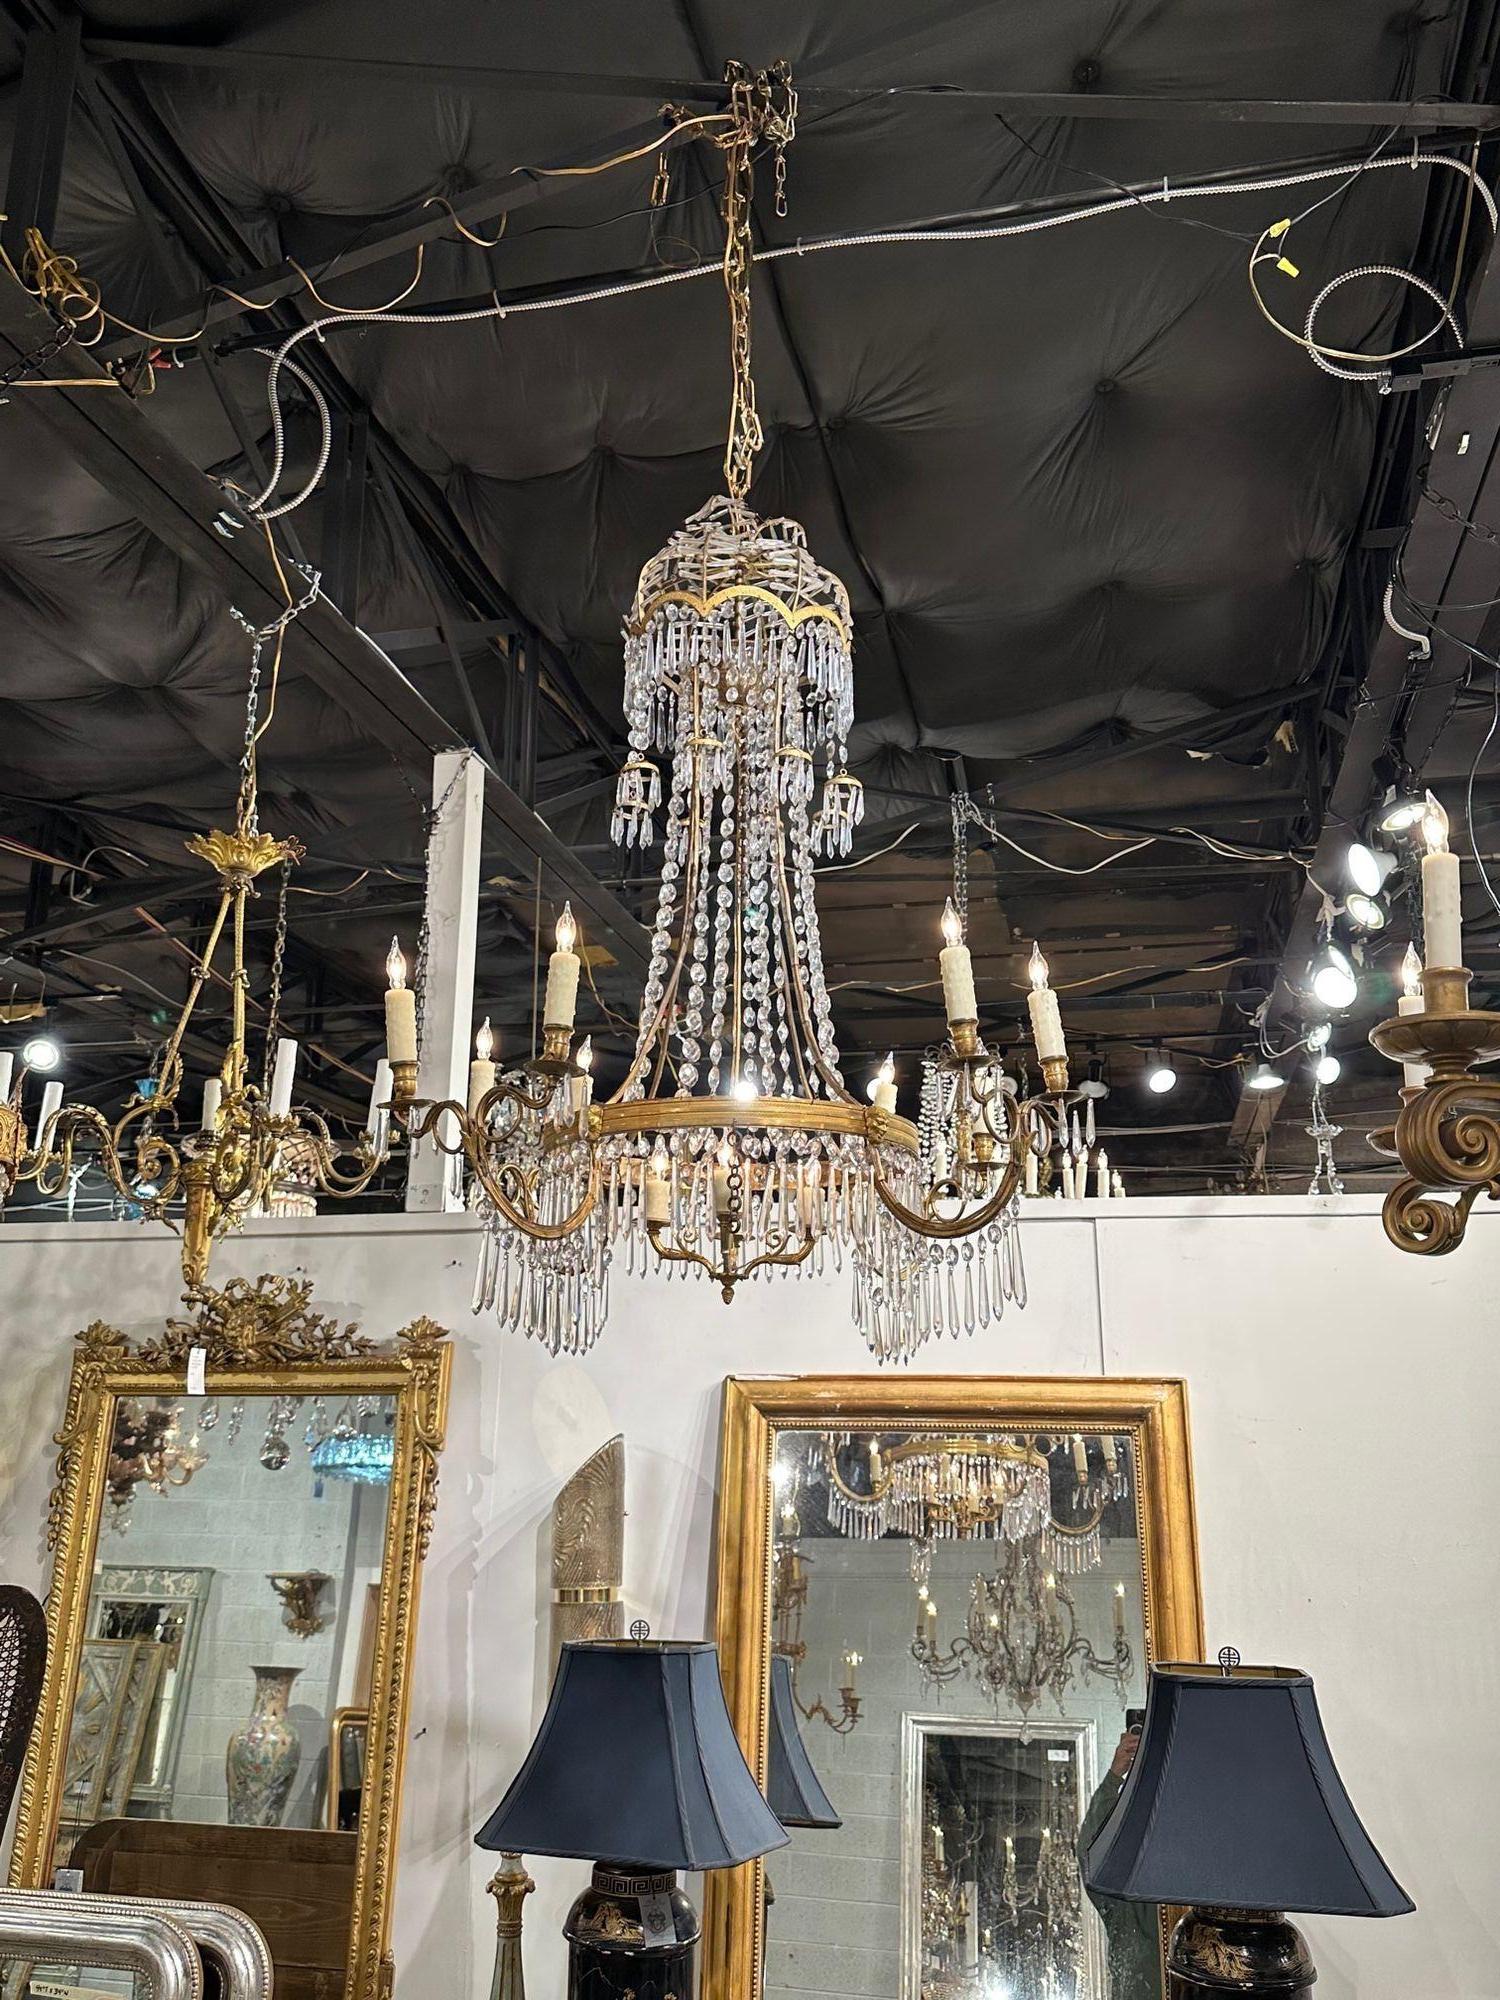 Fine 19th century bronze and crystal chandelier, circa 1870. The chandelier has been professionally rewired, comes with matching chain and canopy. It is ready to hang!